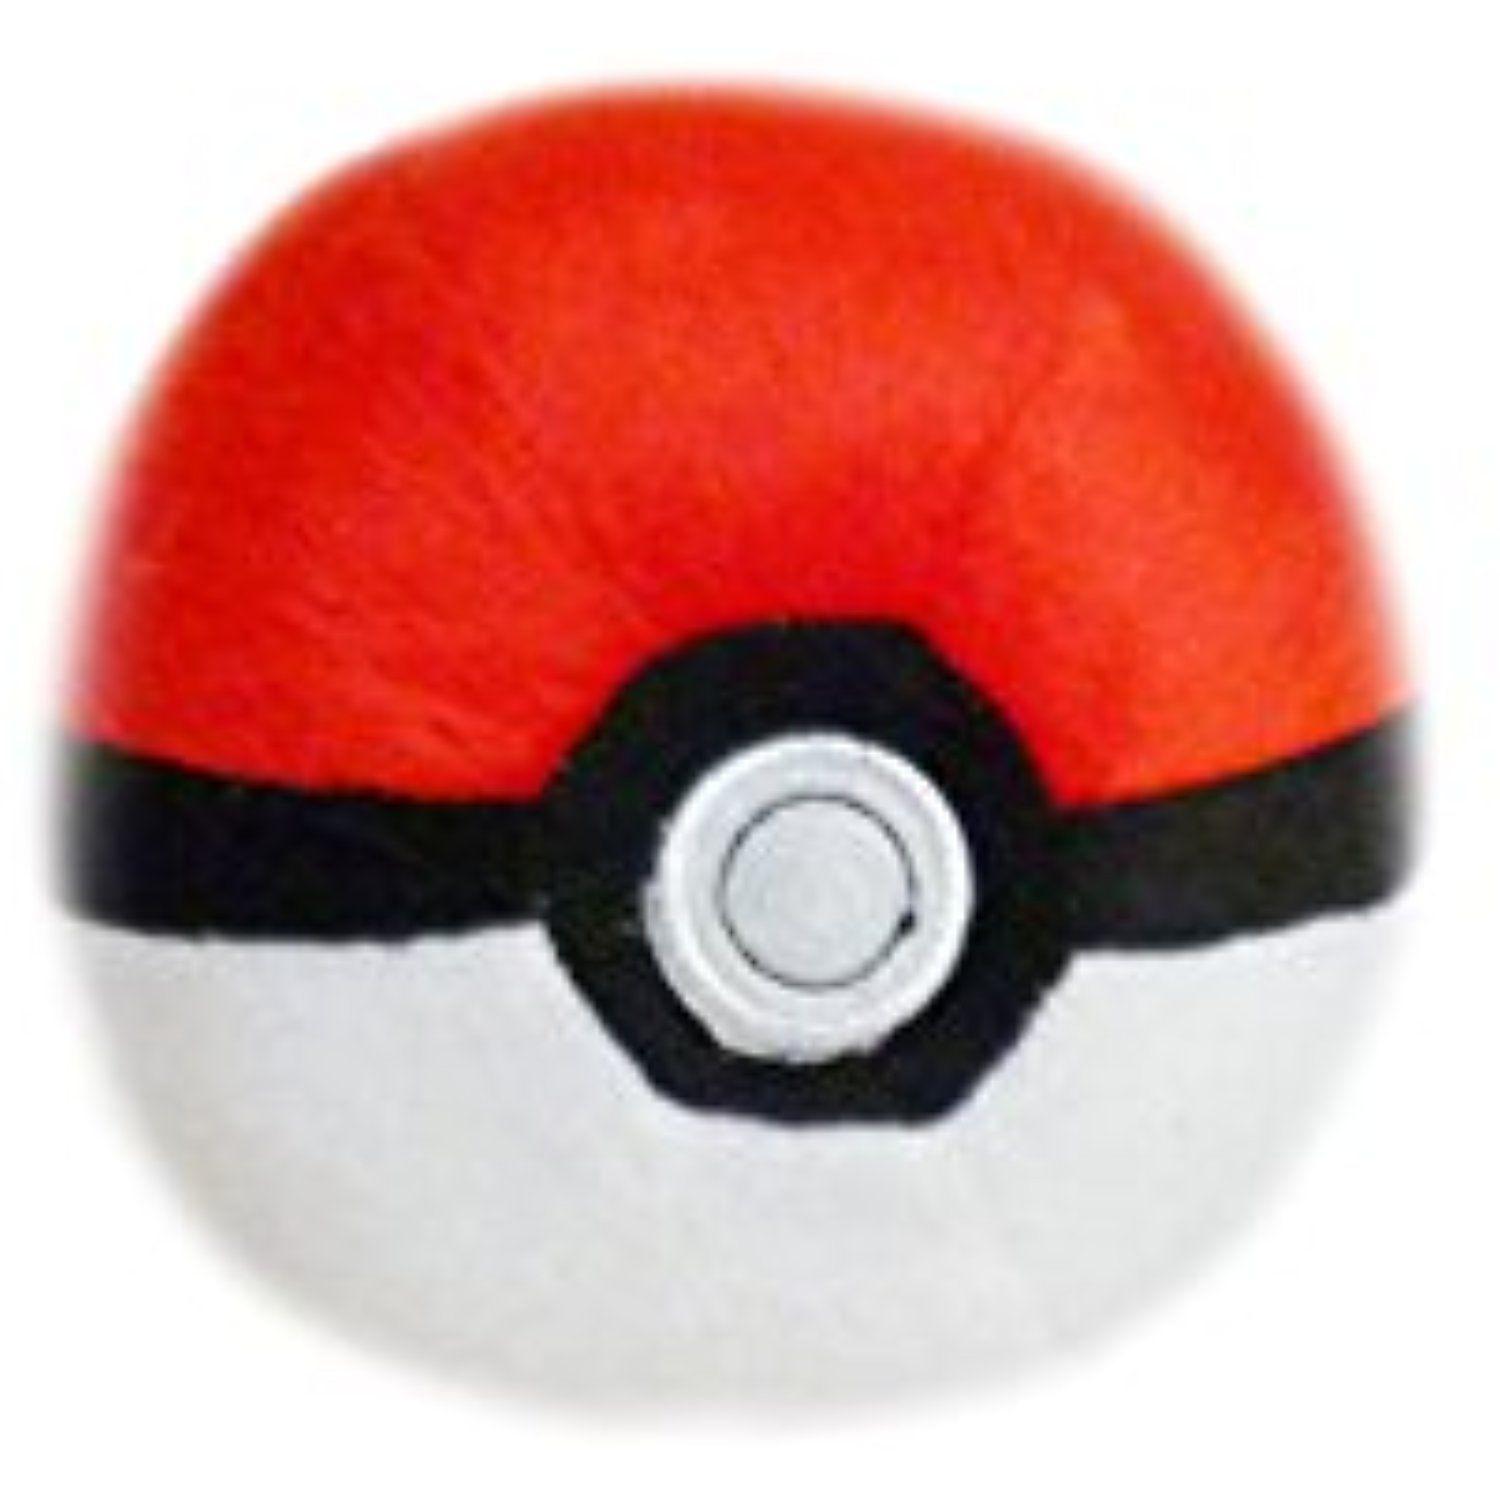 Pokemon Red and White Ball Logo - Pokemon: 5-inch Red/White Poke Ball Plush Toy * Be sure to check out ...